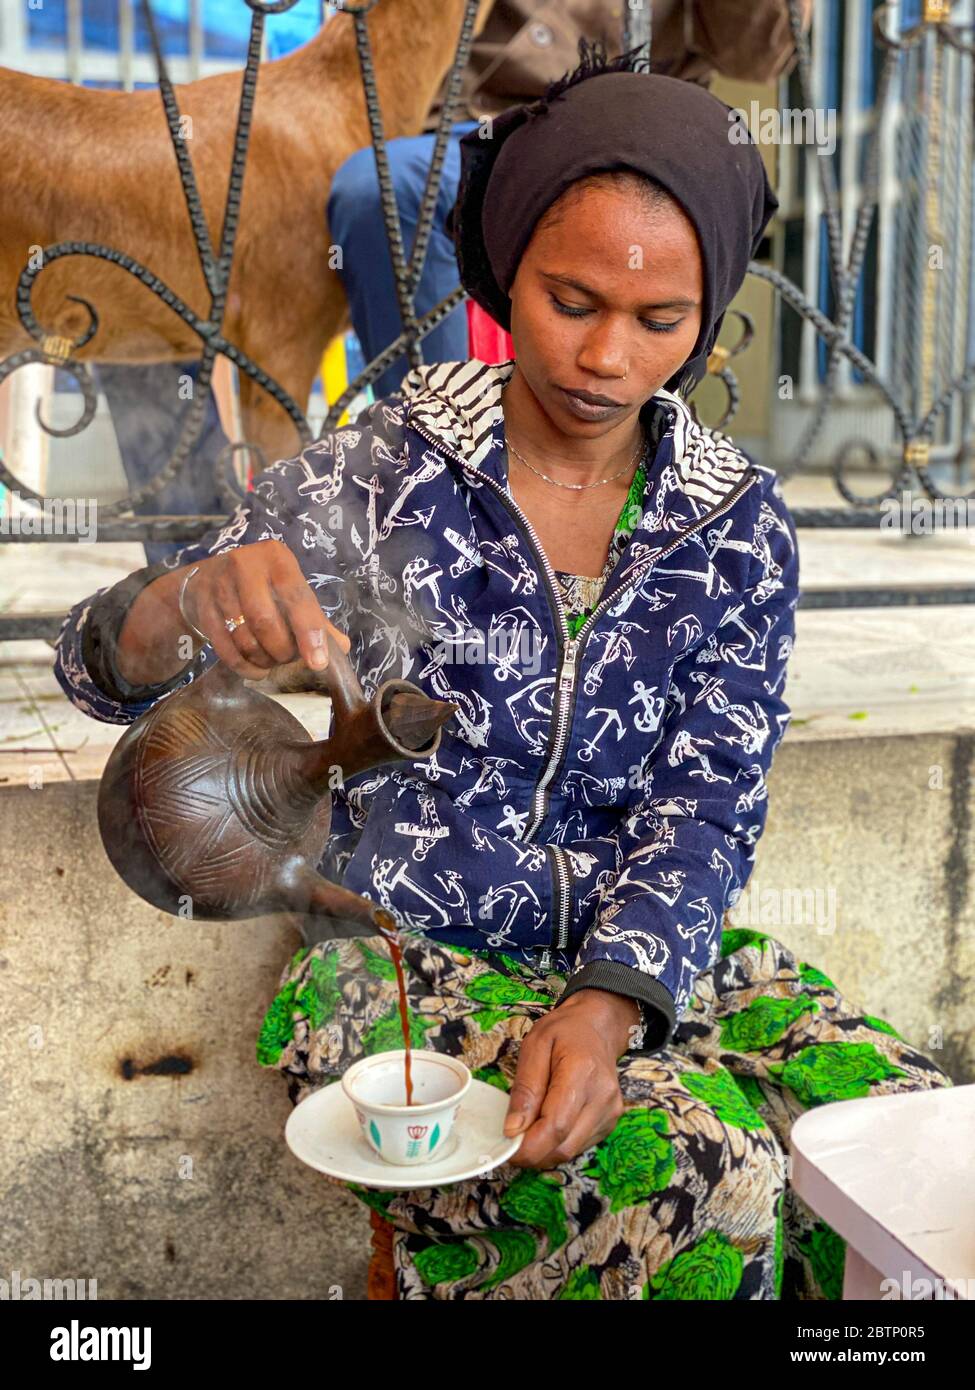 Woman pouring coffee in a cup, Danakil Depression, Afar Region, Ethiopia, Africa Stock Photo